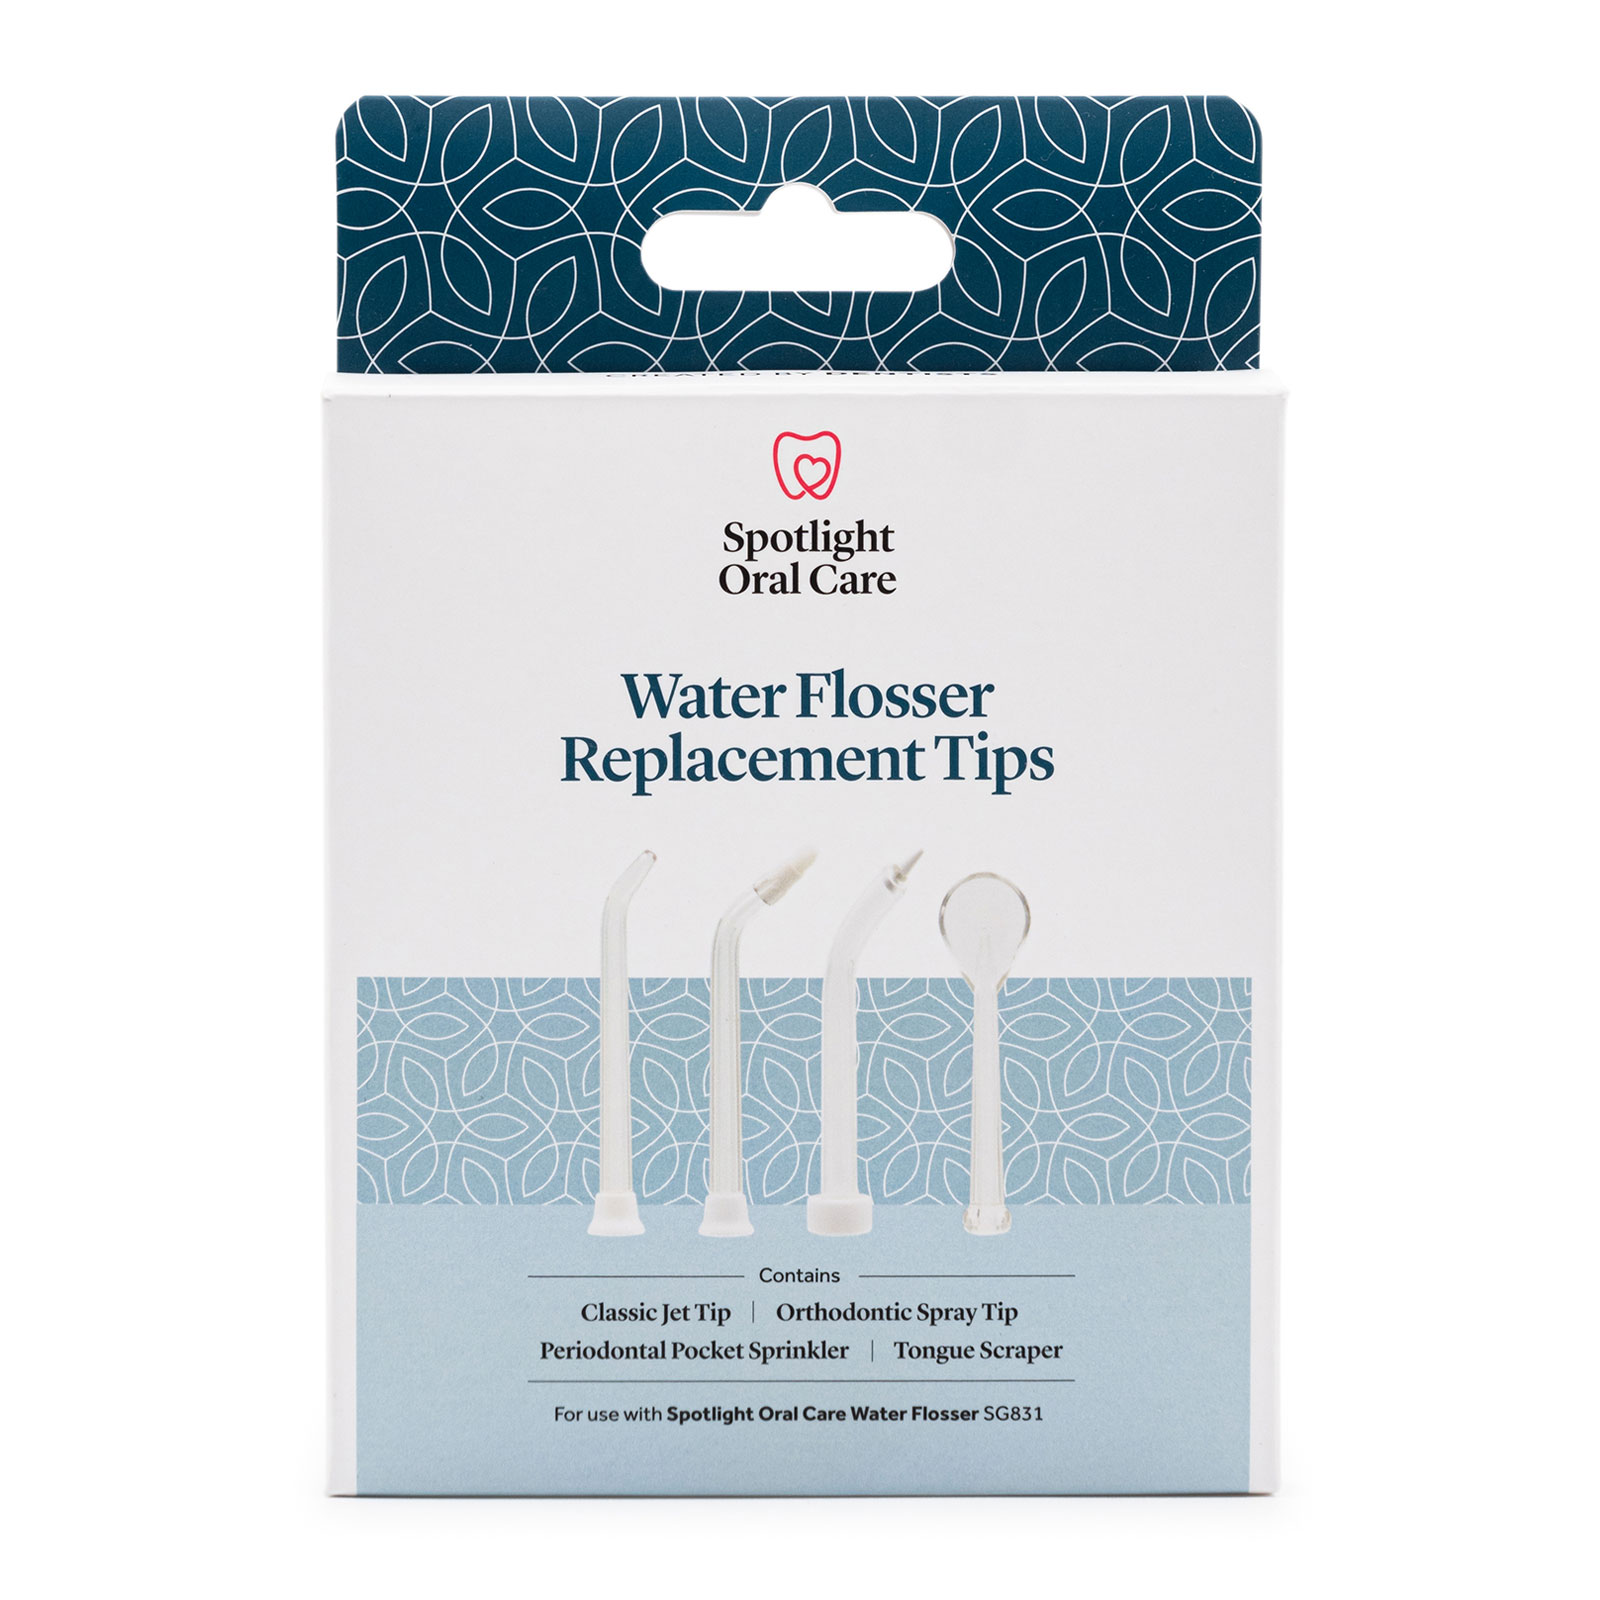 Spotlight Oral Care Water Flosser Replacement Tips X 4